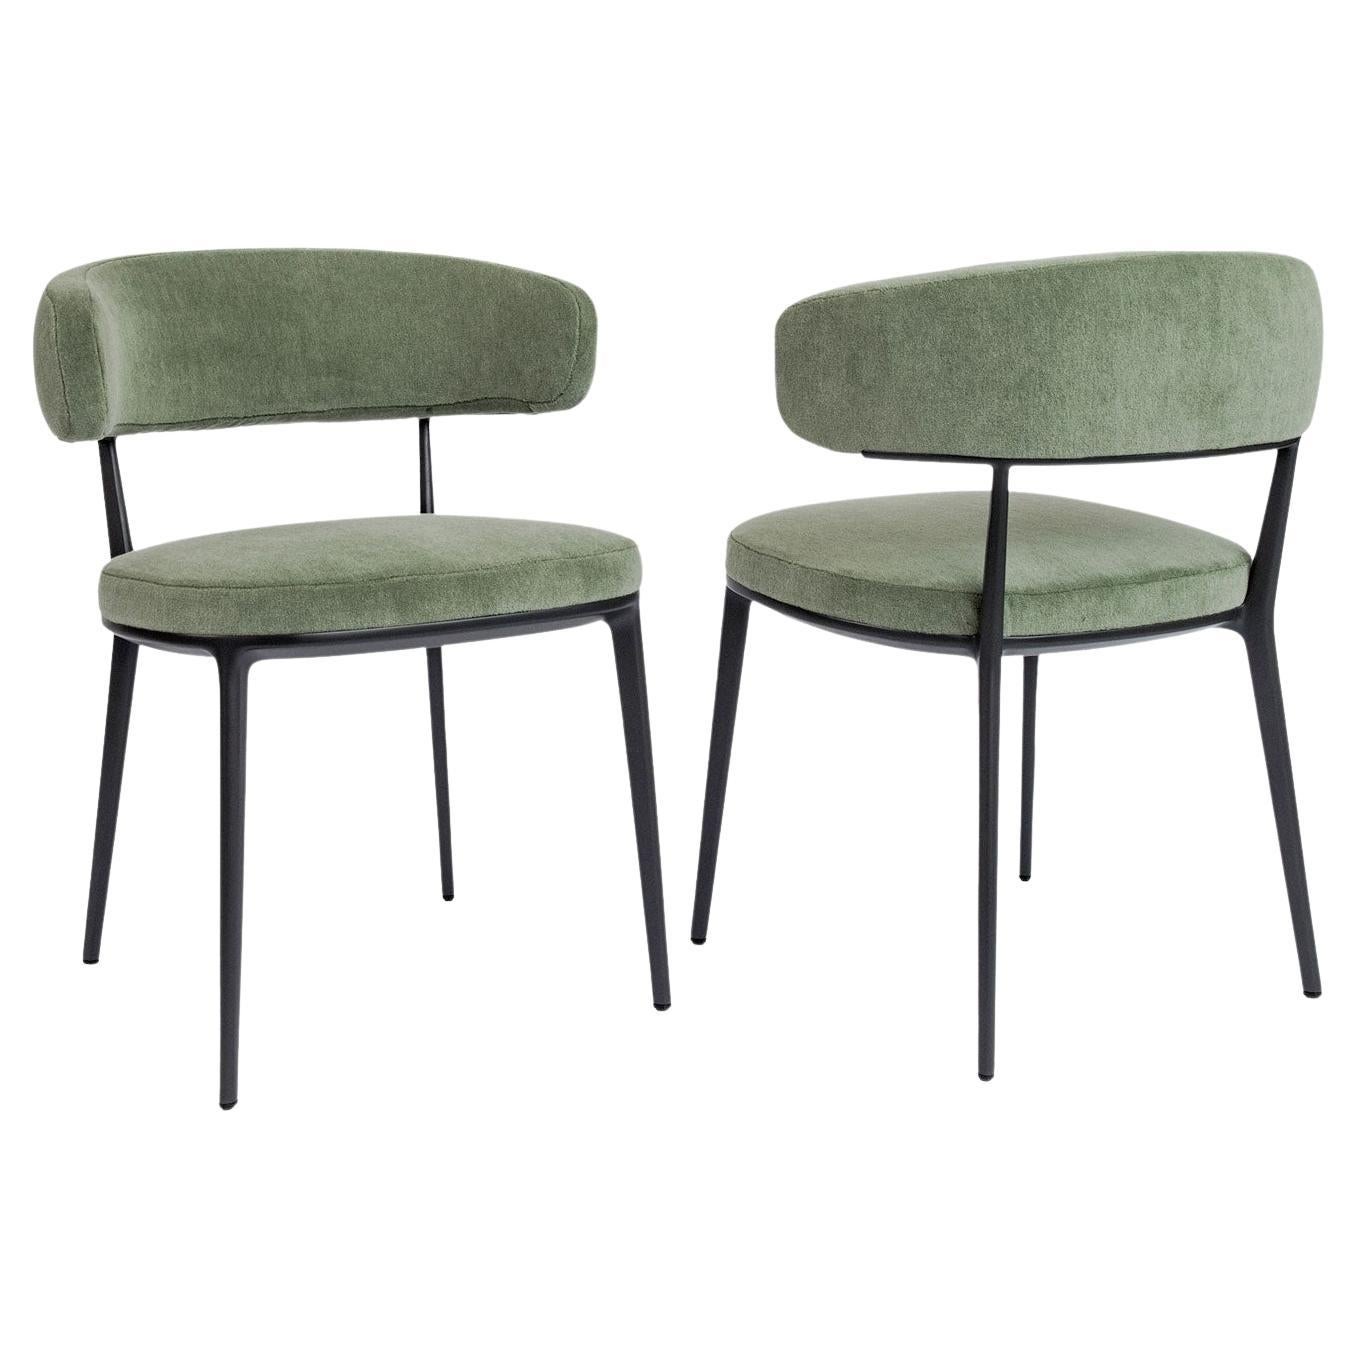 Caratos Dining Chair in Sage-colored Velvet by Maxalto - Available Now